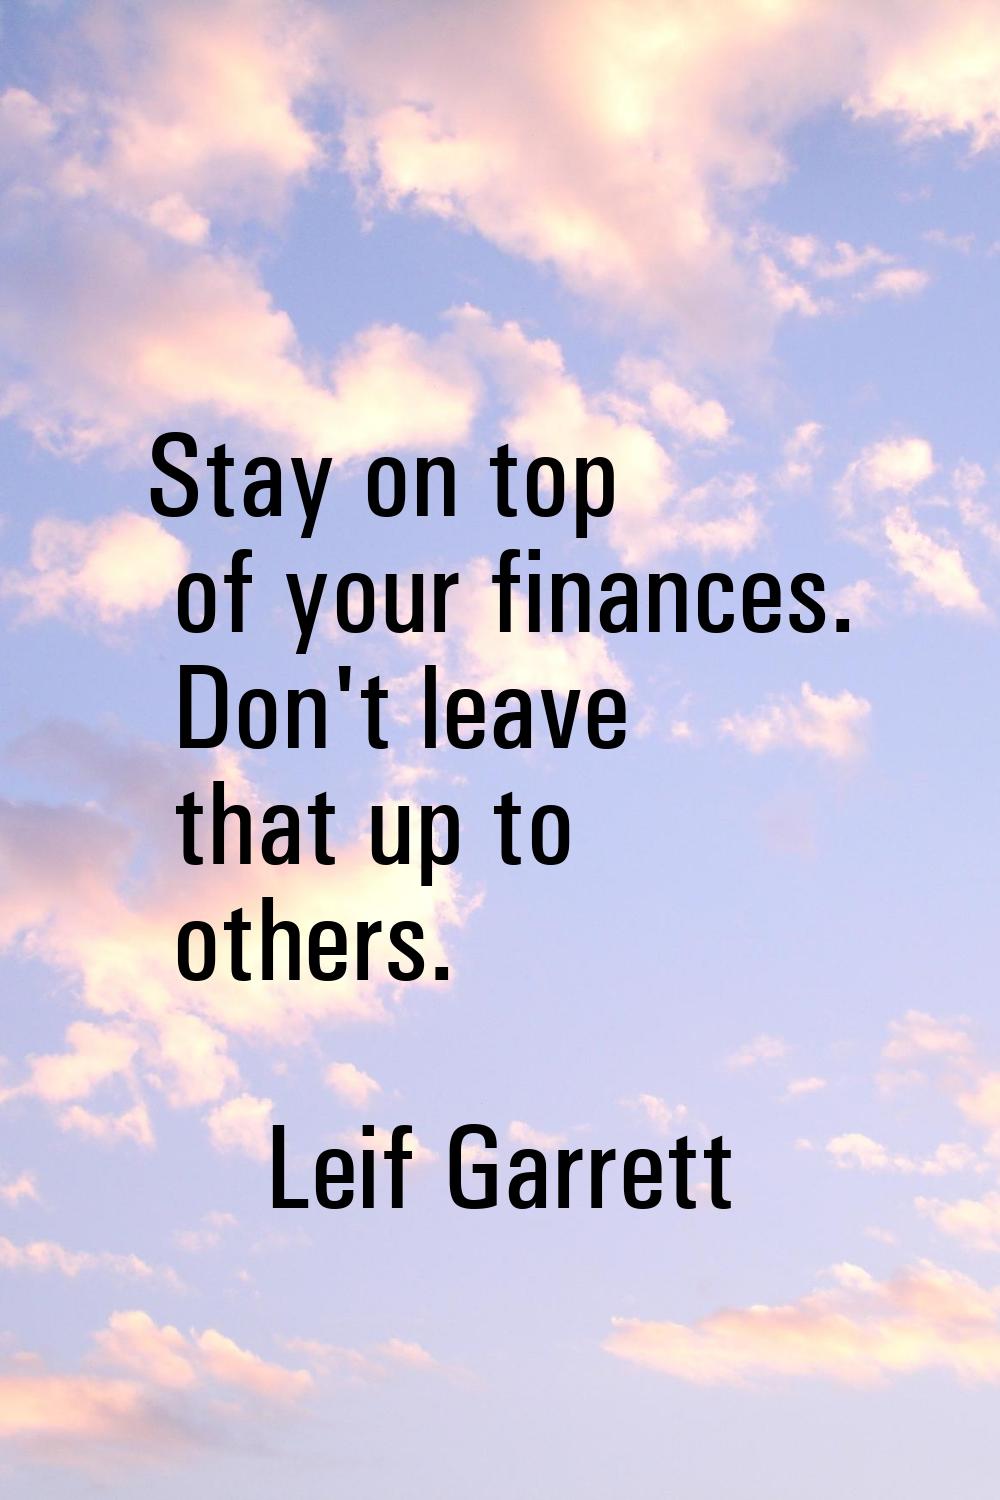 Stay on top of your finances. Don't leave that up to others.